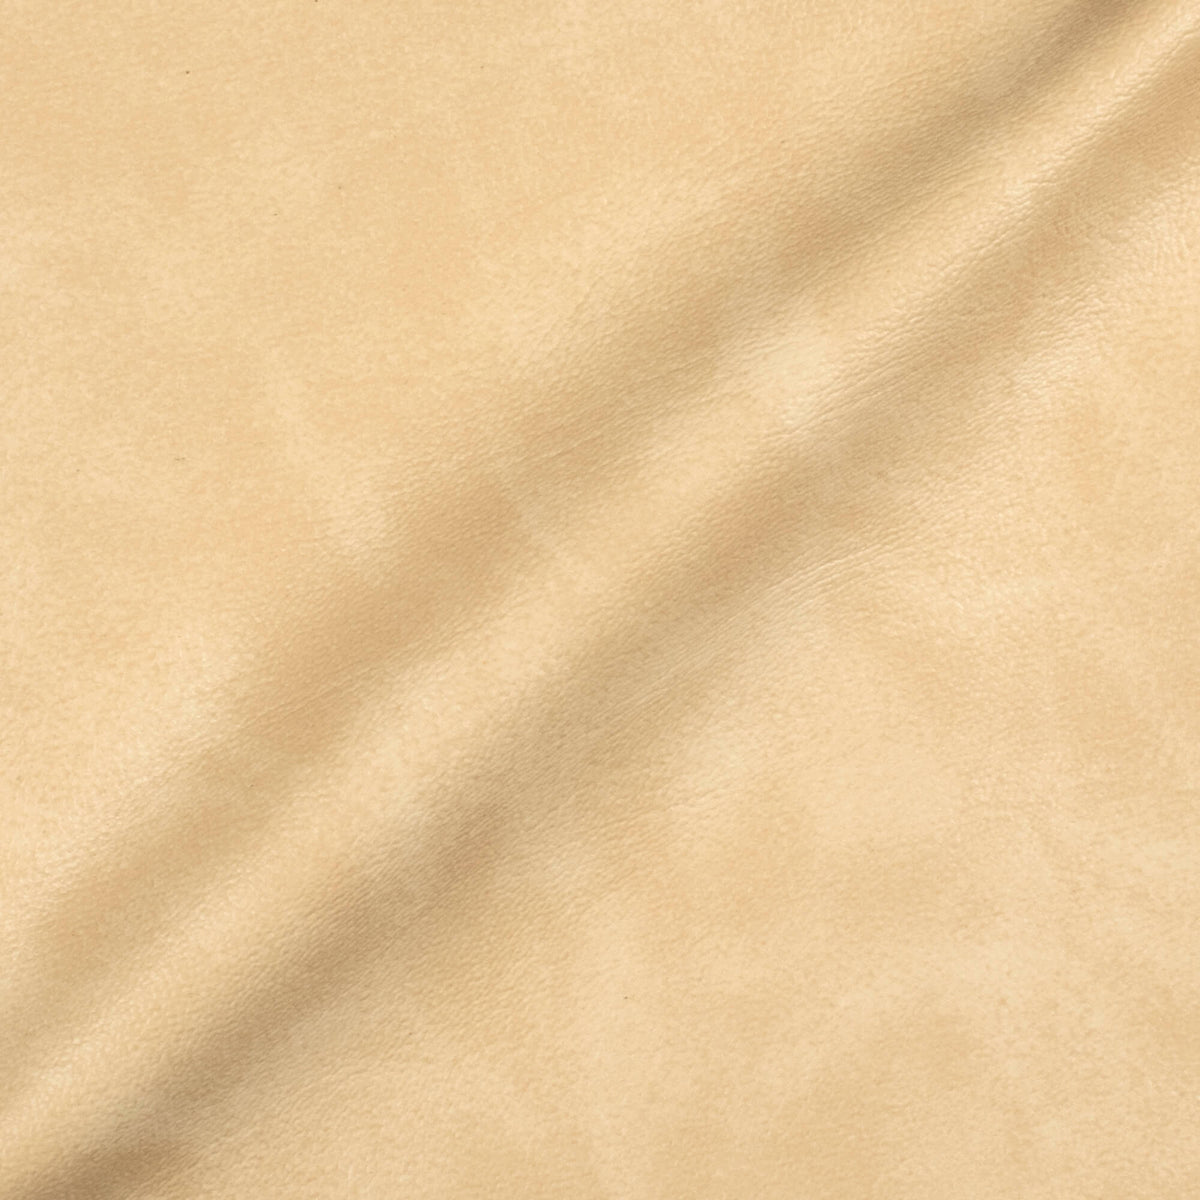 Tan Beige Self Textured Exclusive Sofa Fabric (Width 54 Inches)